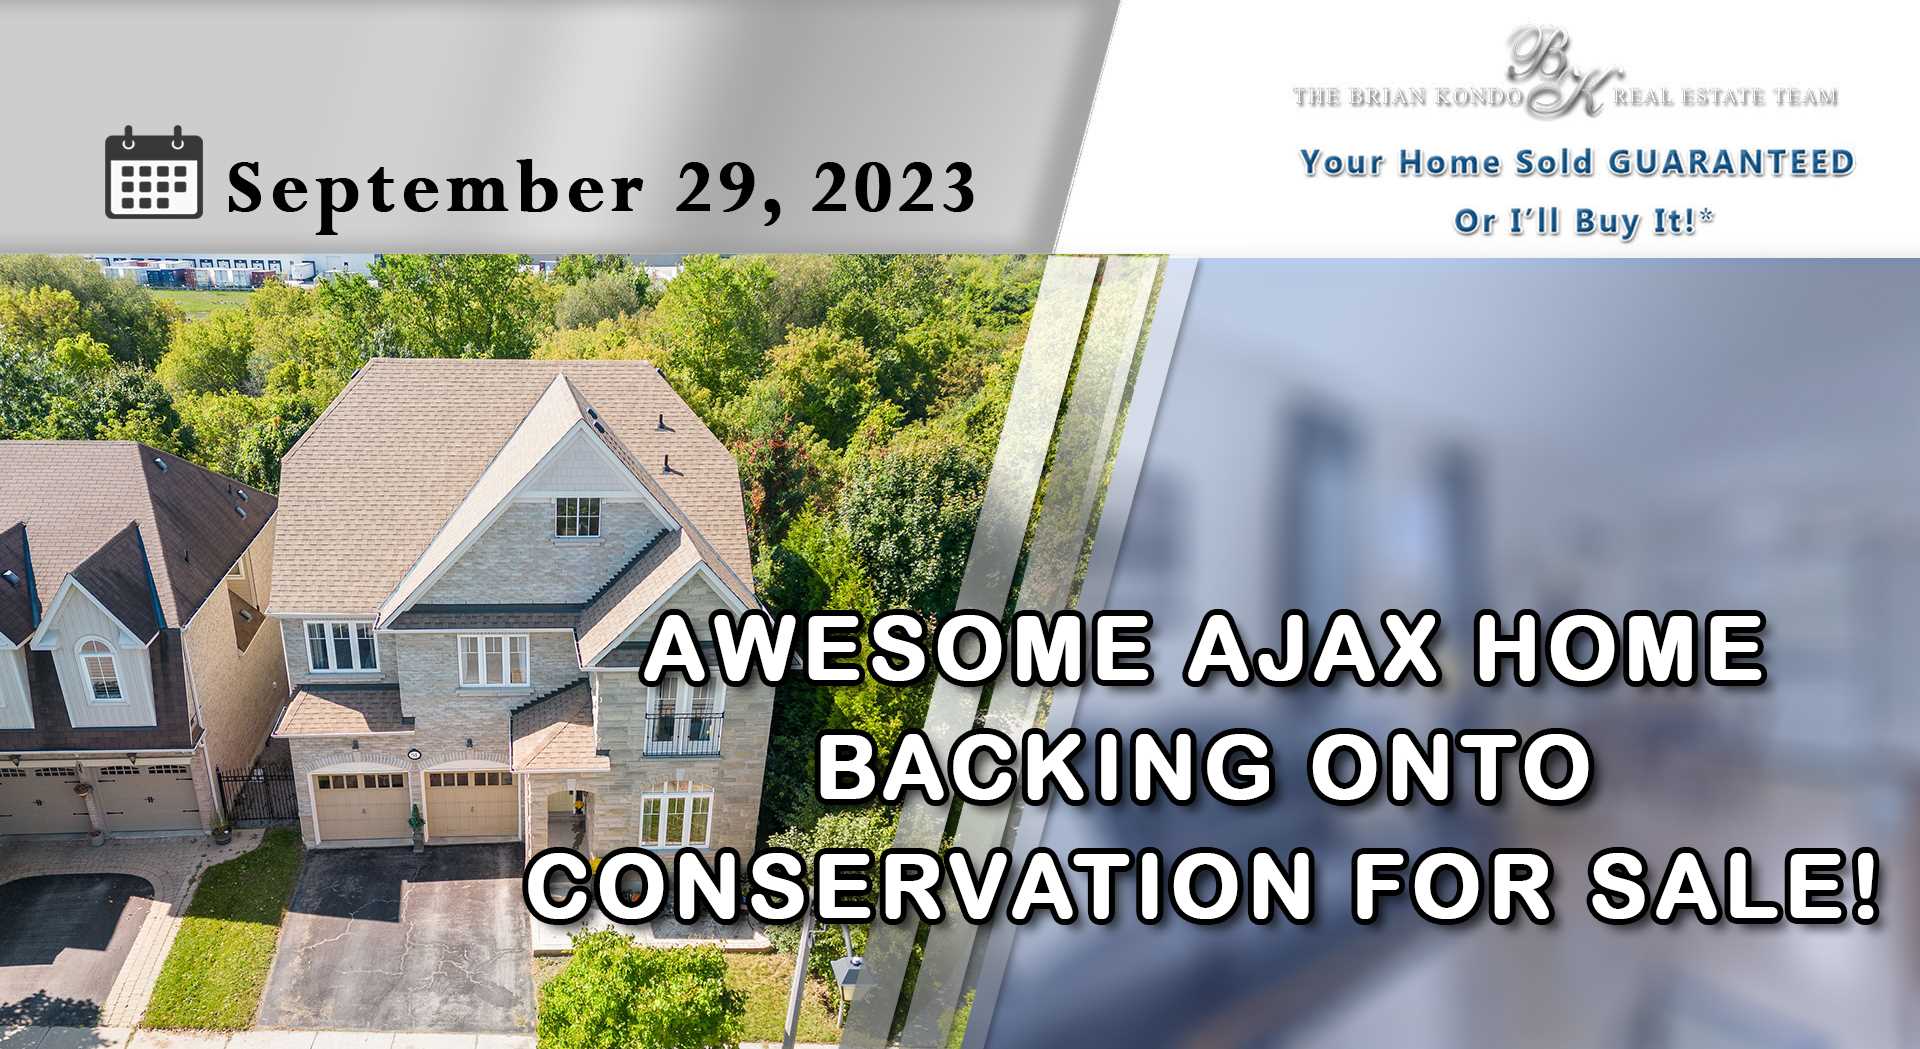 AWESOME AJAX HOME - APPROX. 3500 SQ. FEET FOR SALE!